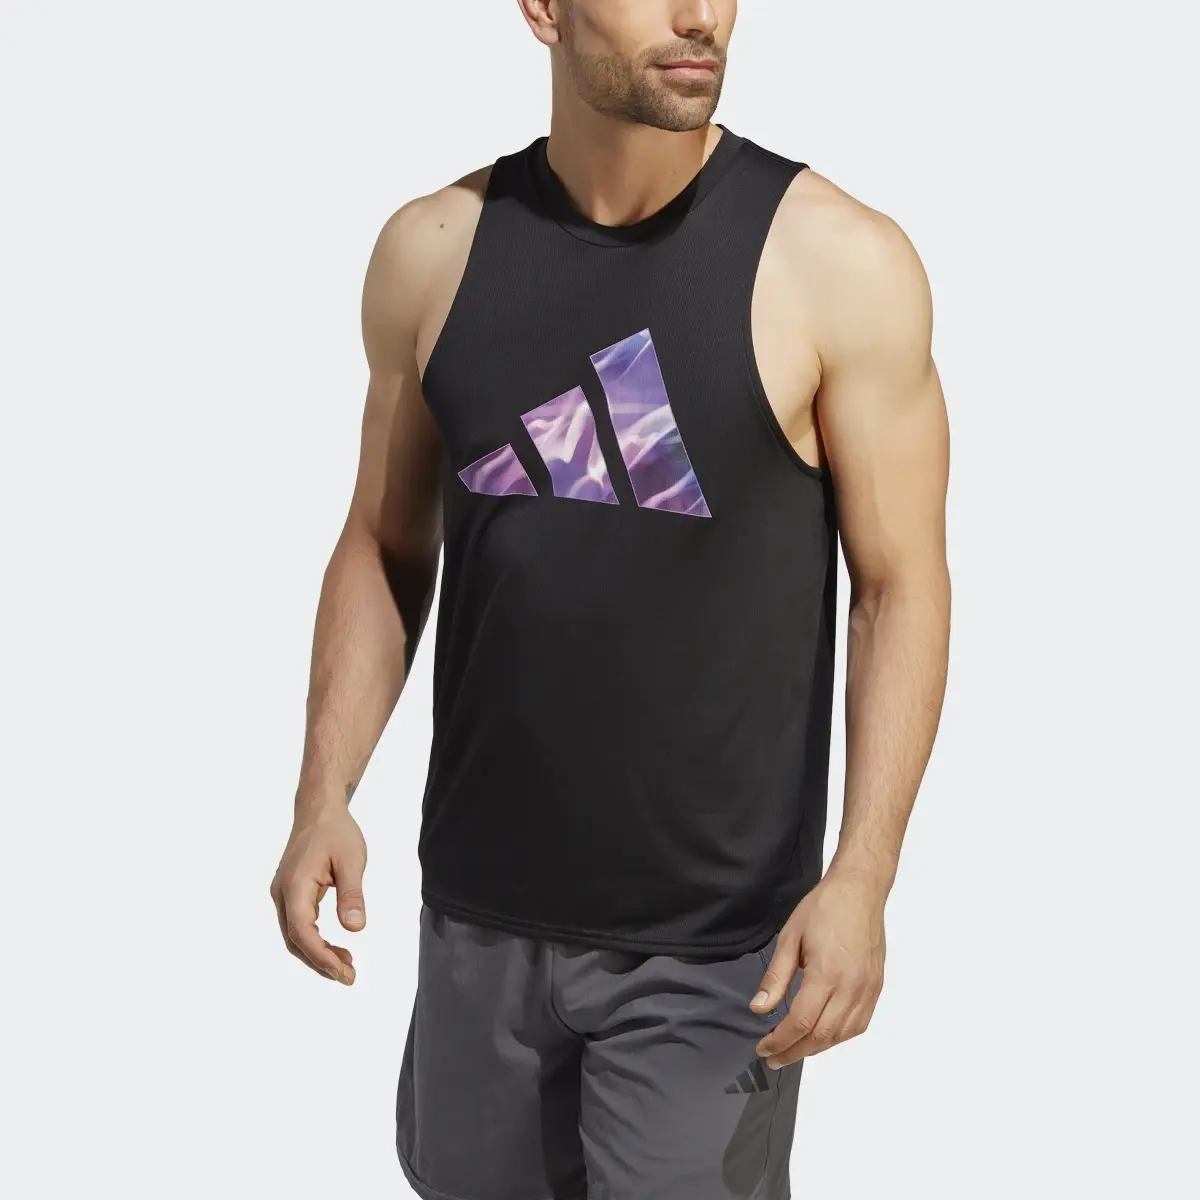 Adidas Designed for Movement HIIT Training Tank Top. 1